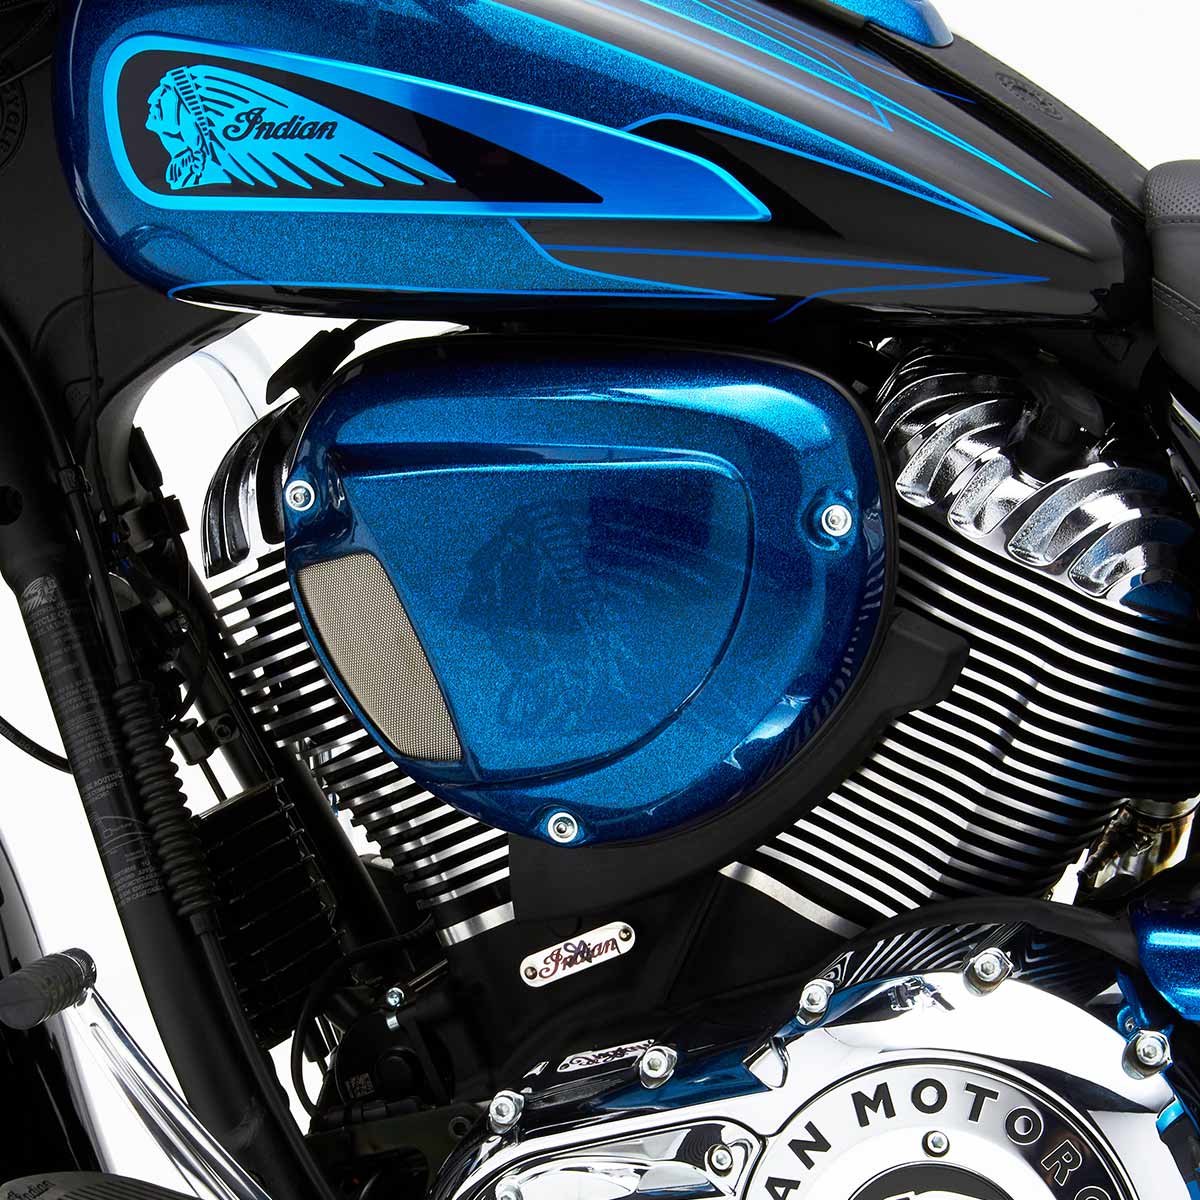 Reytelo Air Cleaner Cover for Indian® motorcycles shown on 2019 Chieftain(Shown on 2019 Chieftain)